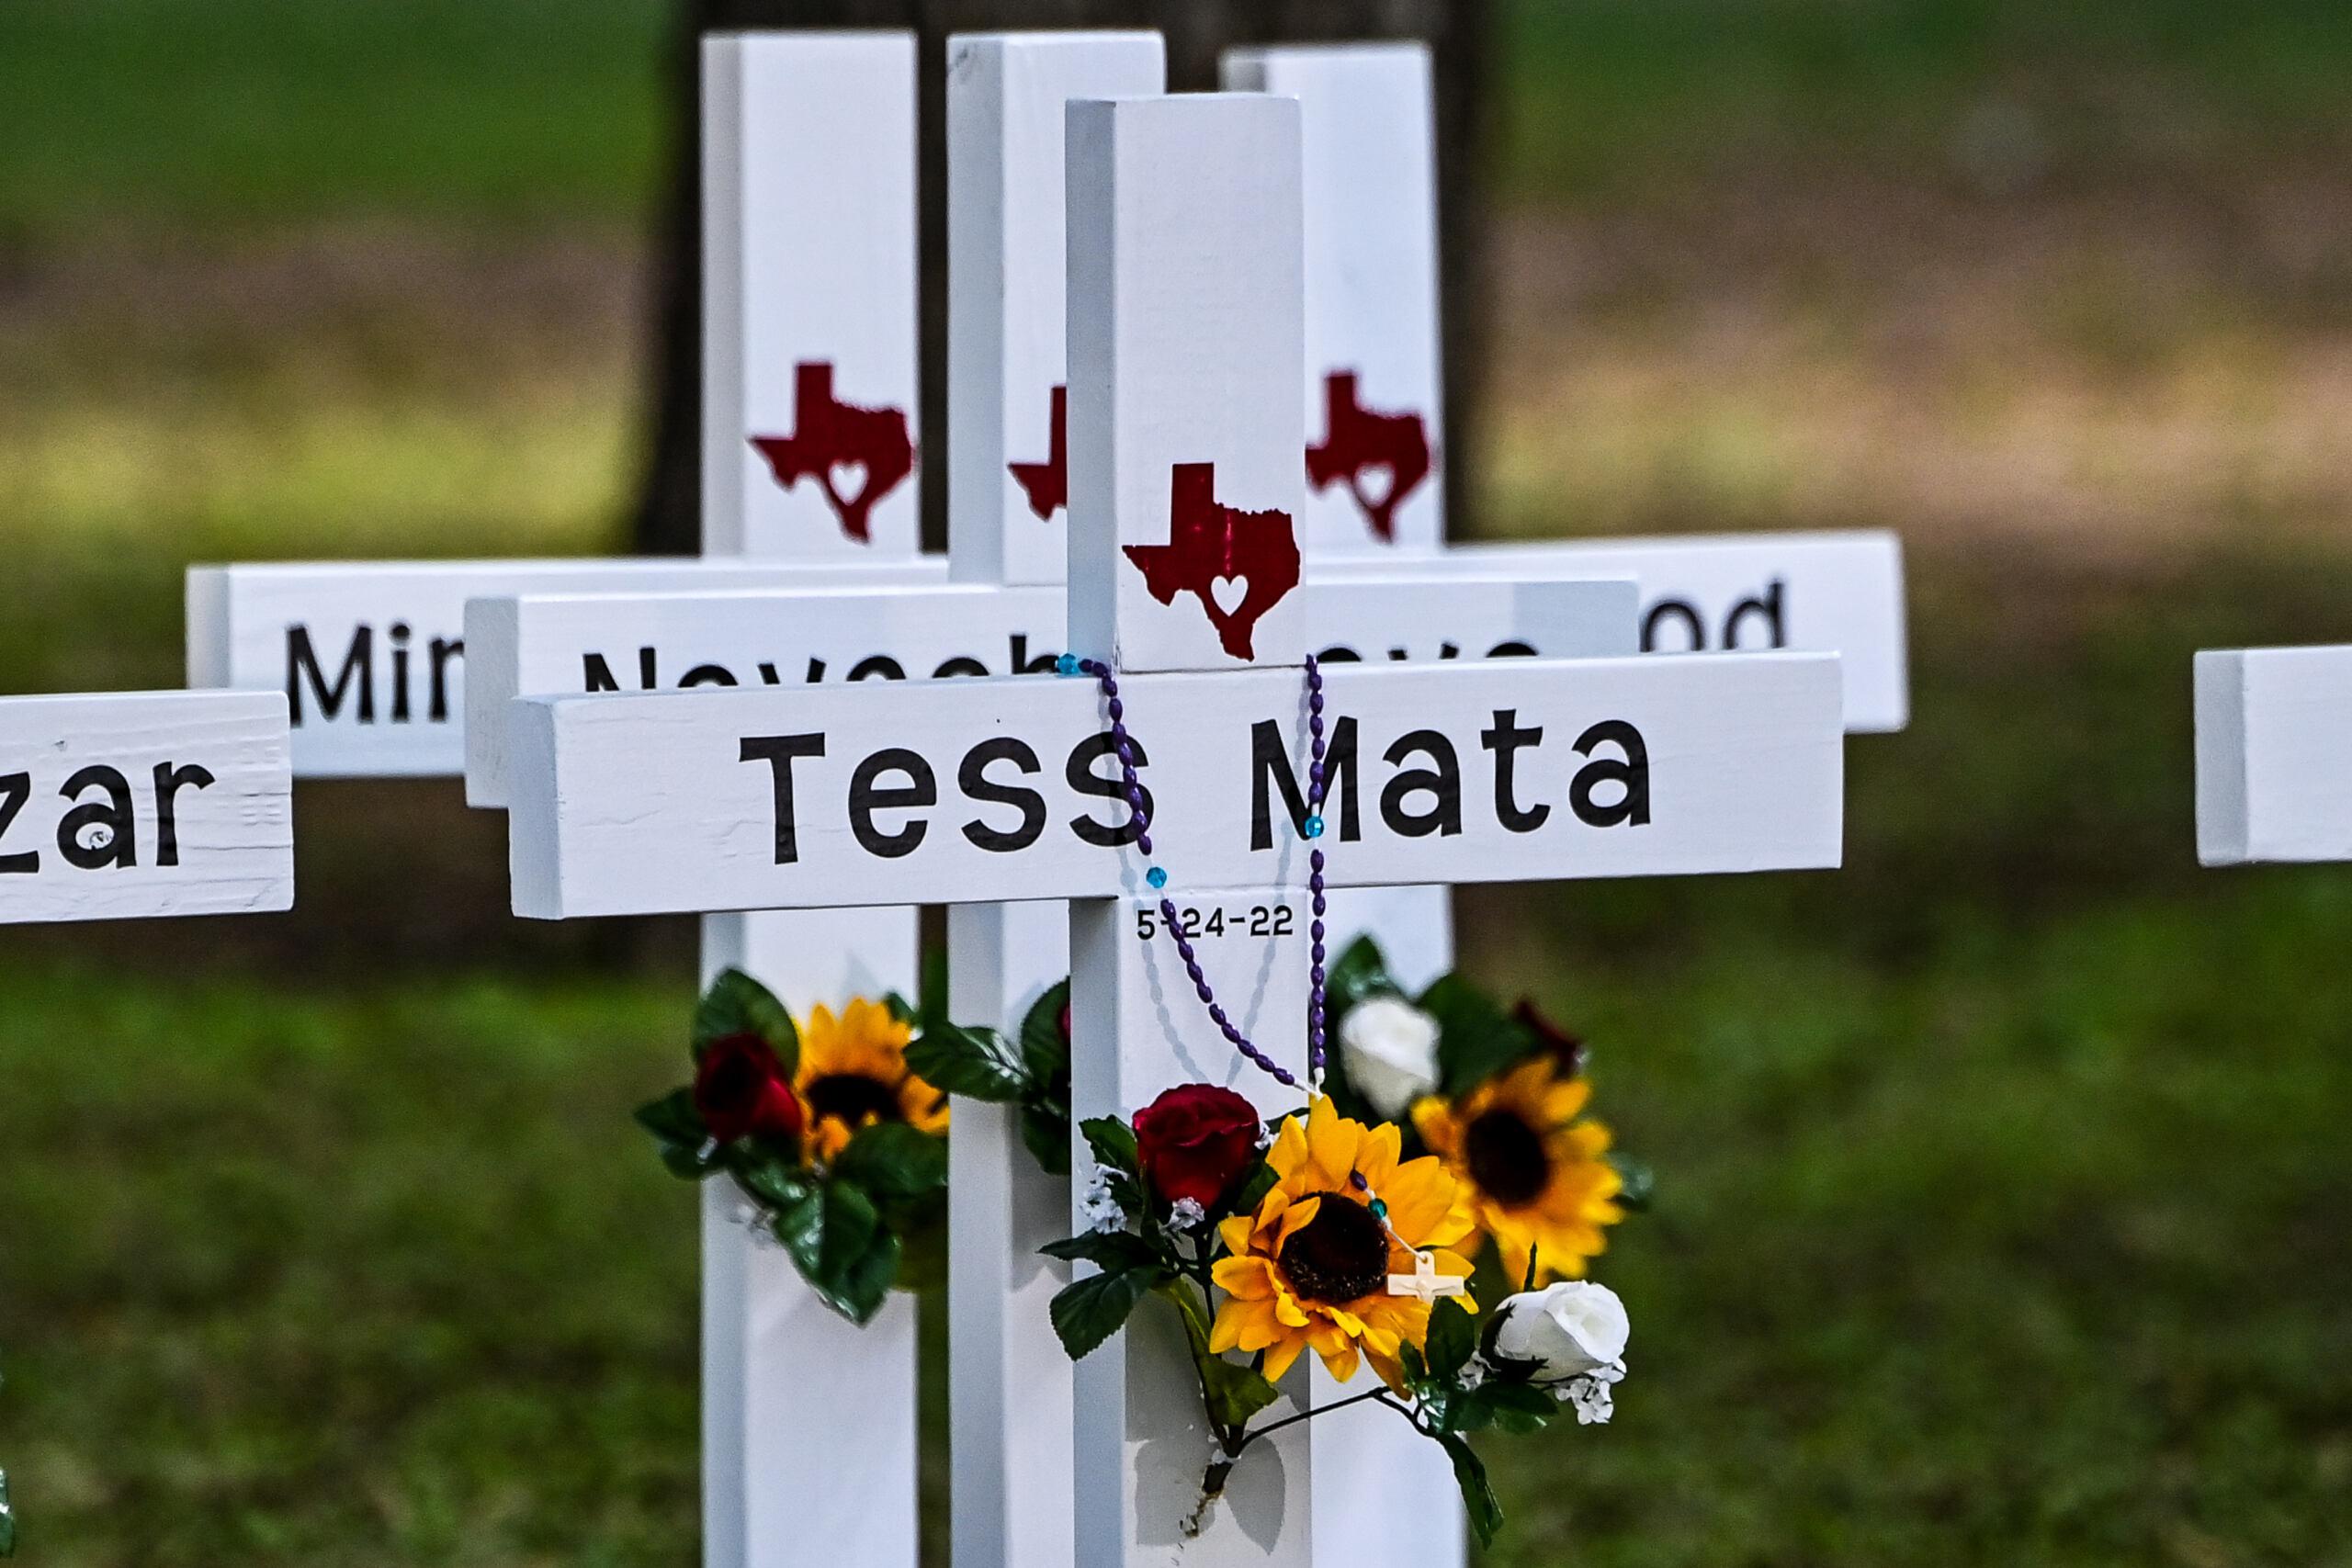 Crosses adorn a makeshift memorial for the shooting victims at Robb Elementary School in Uvalde, Texas, on May 26, 2022. - Grief at the massacre of 19 children at the elementary school in Texas spilled into confrontation on May 25, as angry questions mounted over gun control -- and whether this latest tragedy could have been prevented. The tight-knit Latino community of Uvalde on May 24 became the site of the worst school shooting in a decade, committed by a disturbed 18-year-old armed with a legally bought assault rifle. (Photo by CHANDAN KHANNA / AFP)